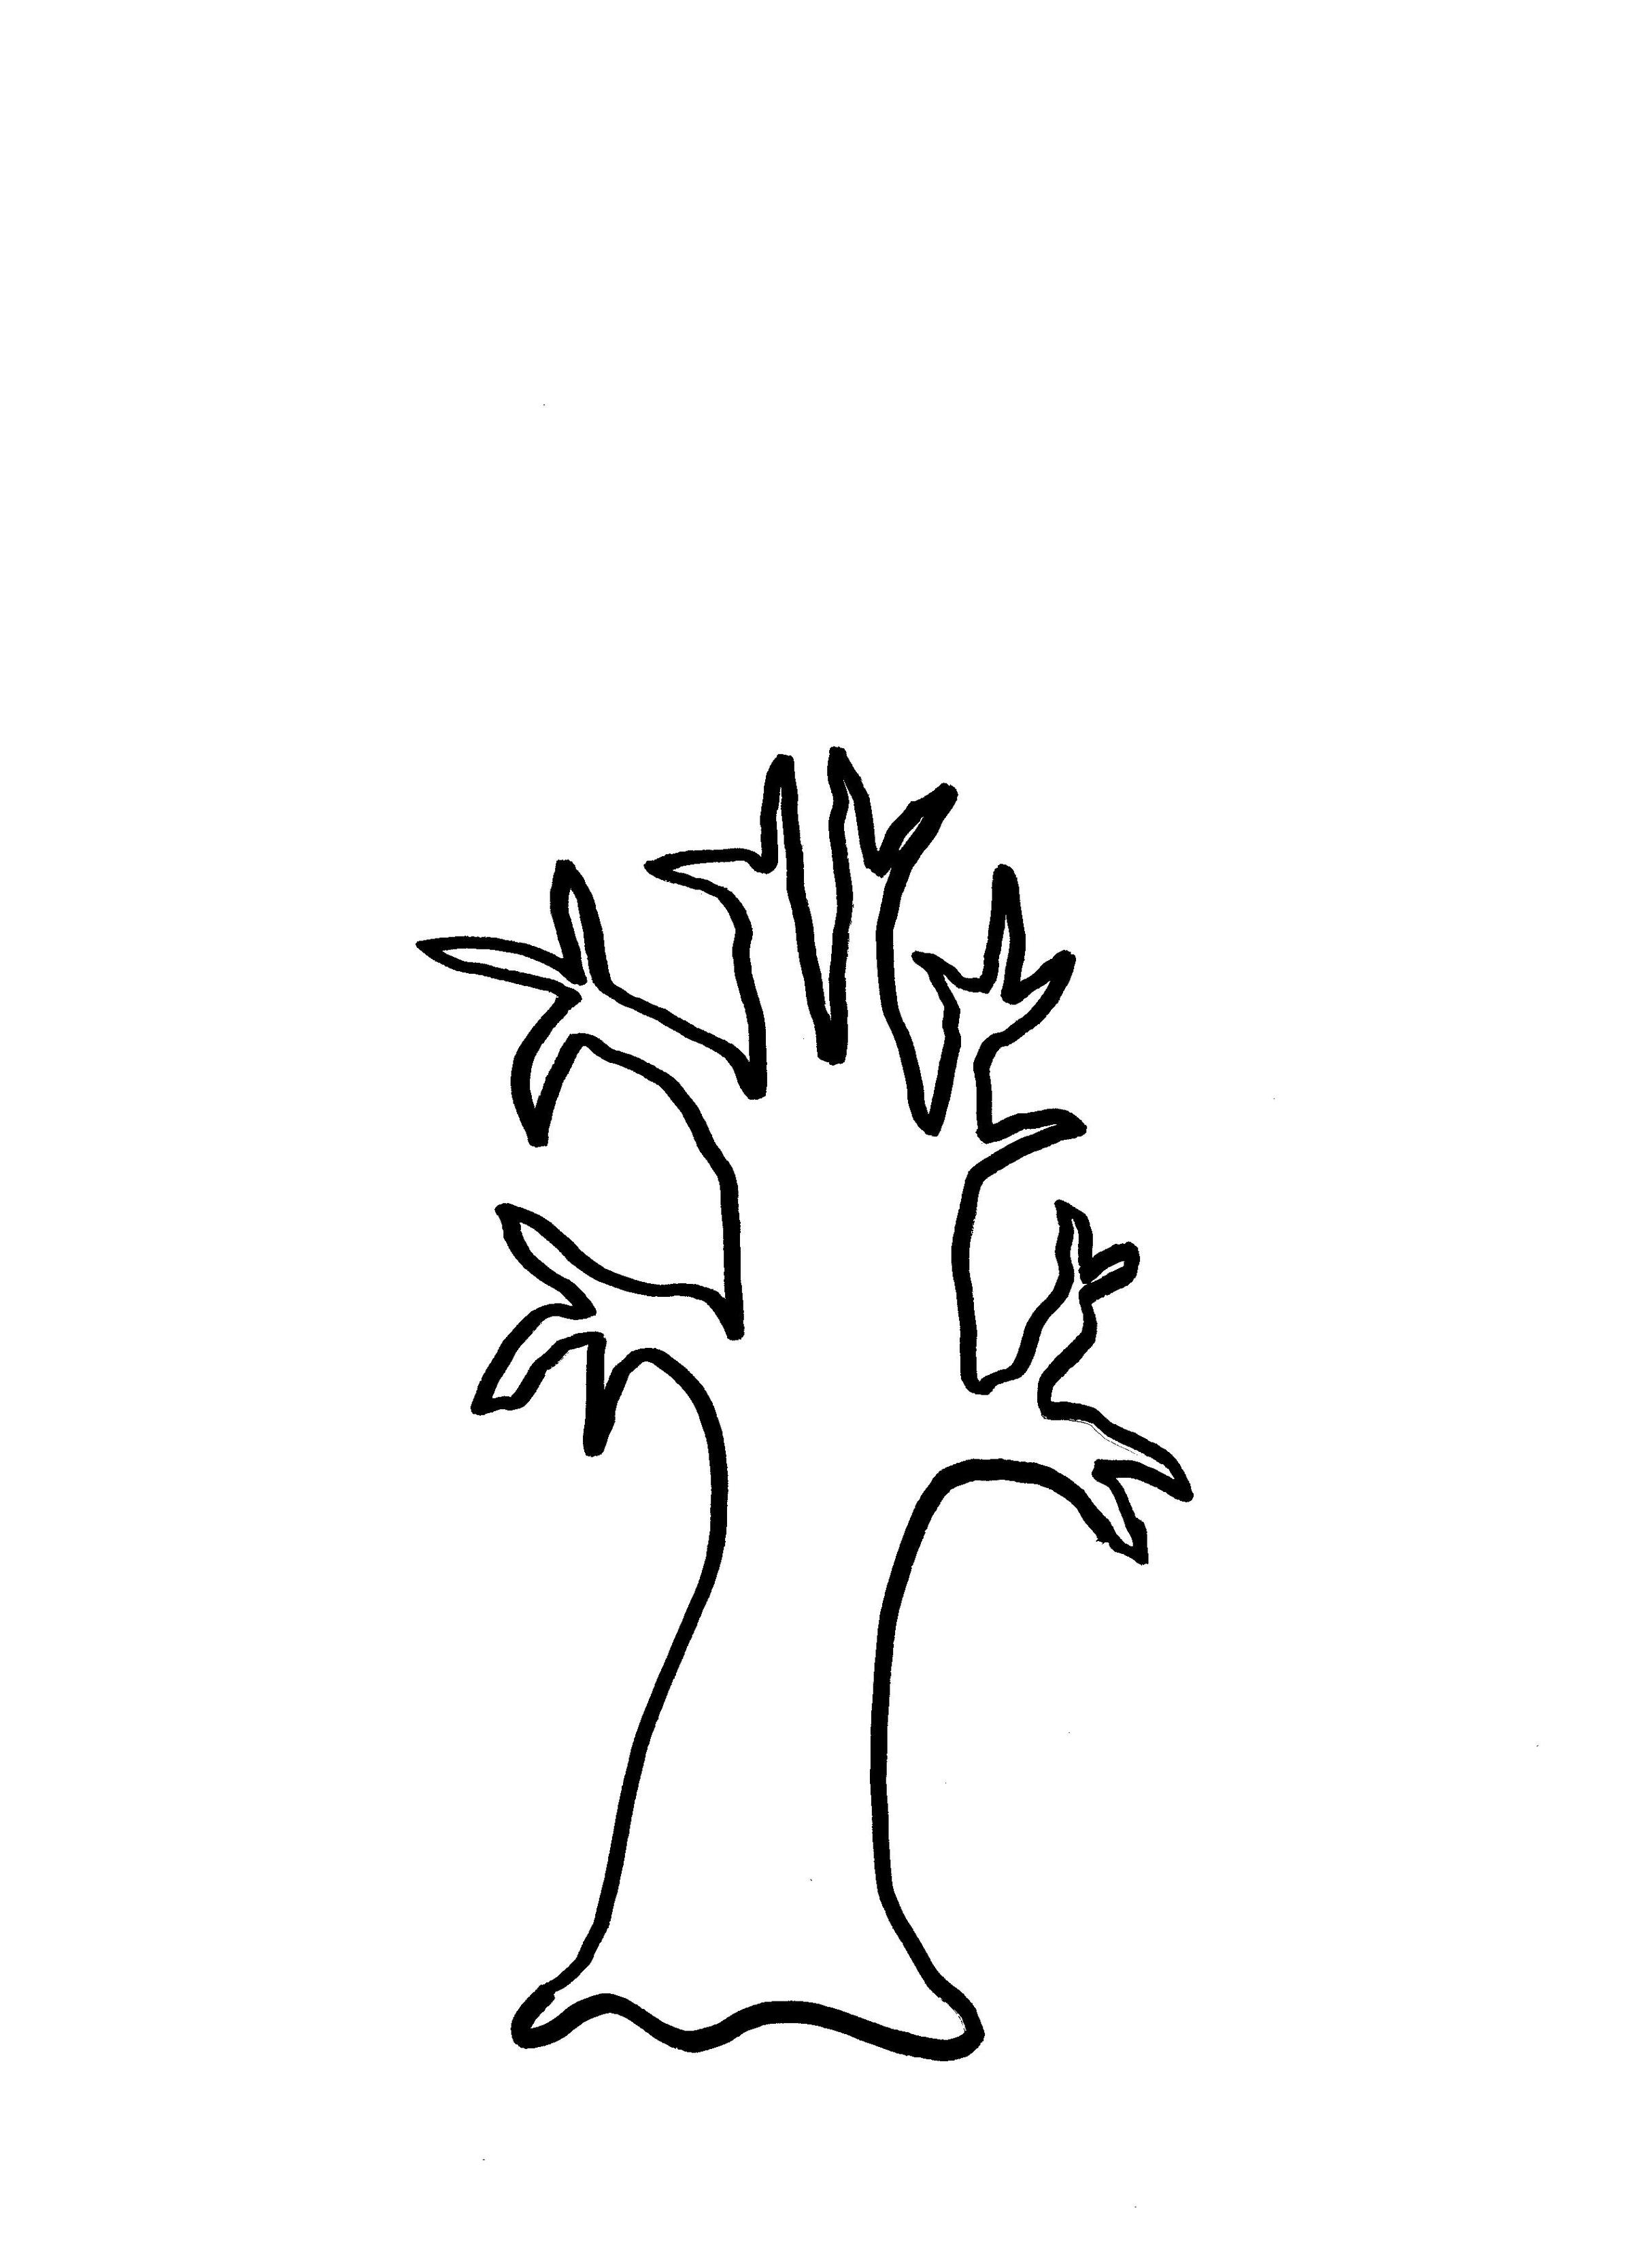 Printable Tree Template Clipart - Free to use Clip Art Resource